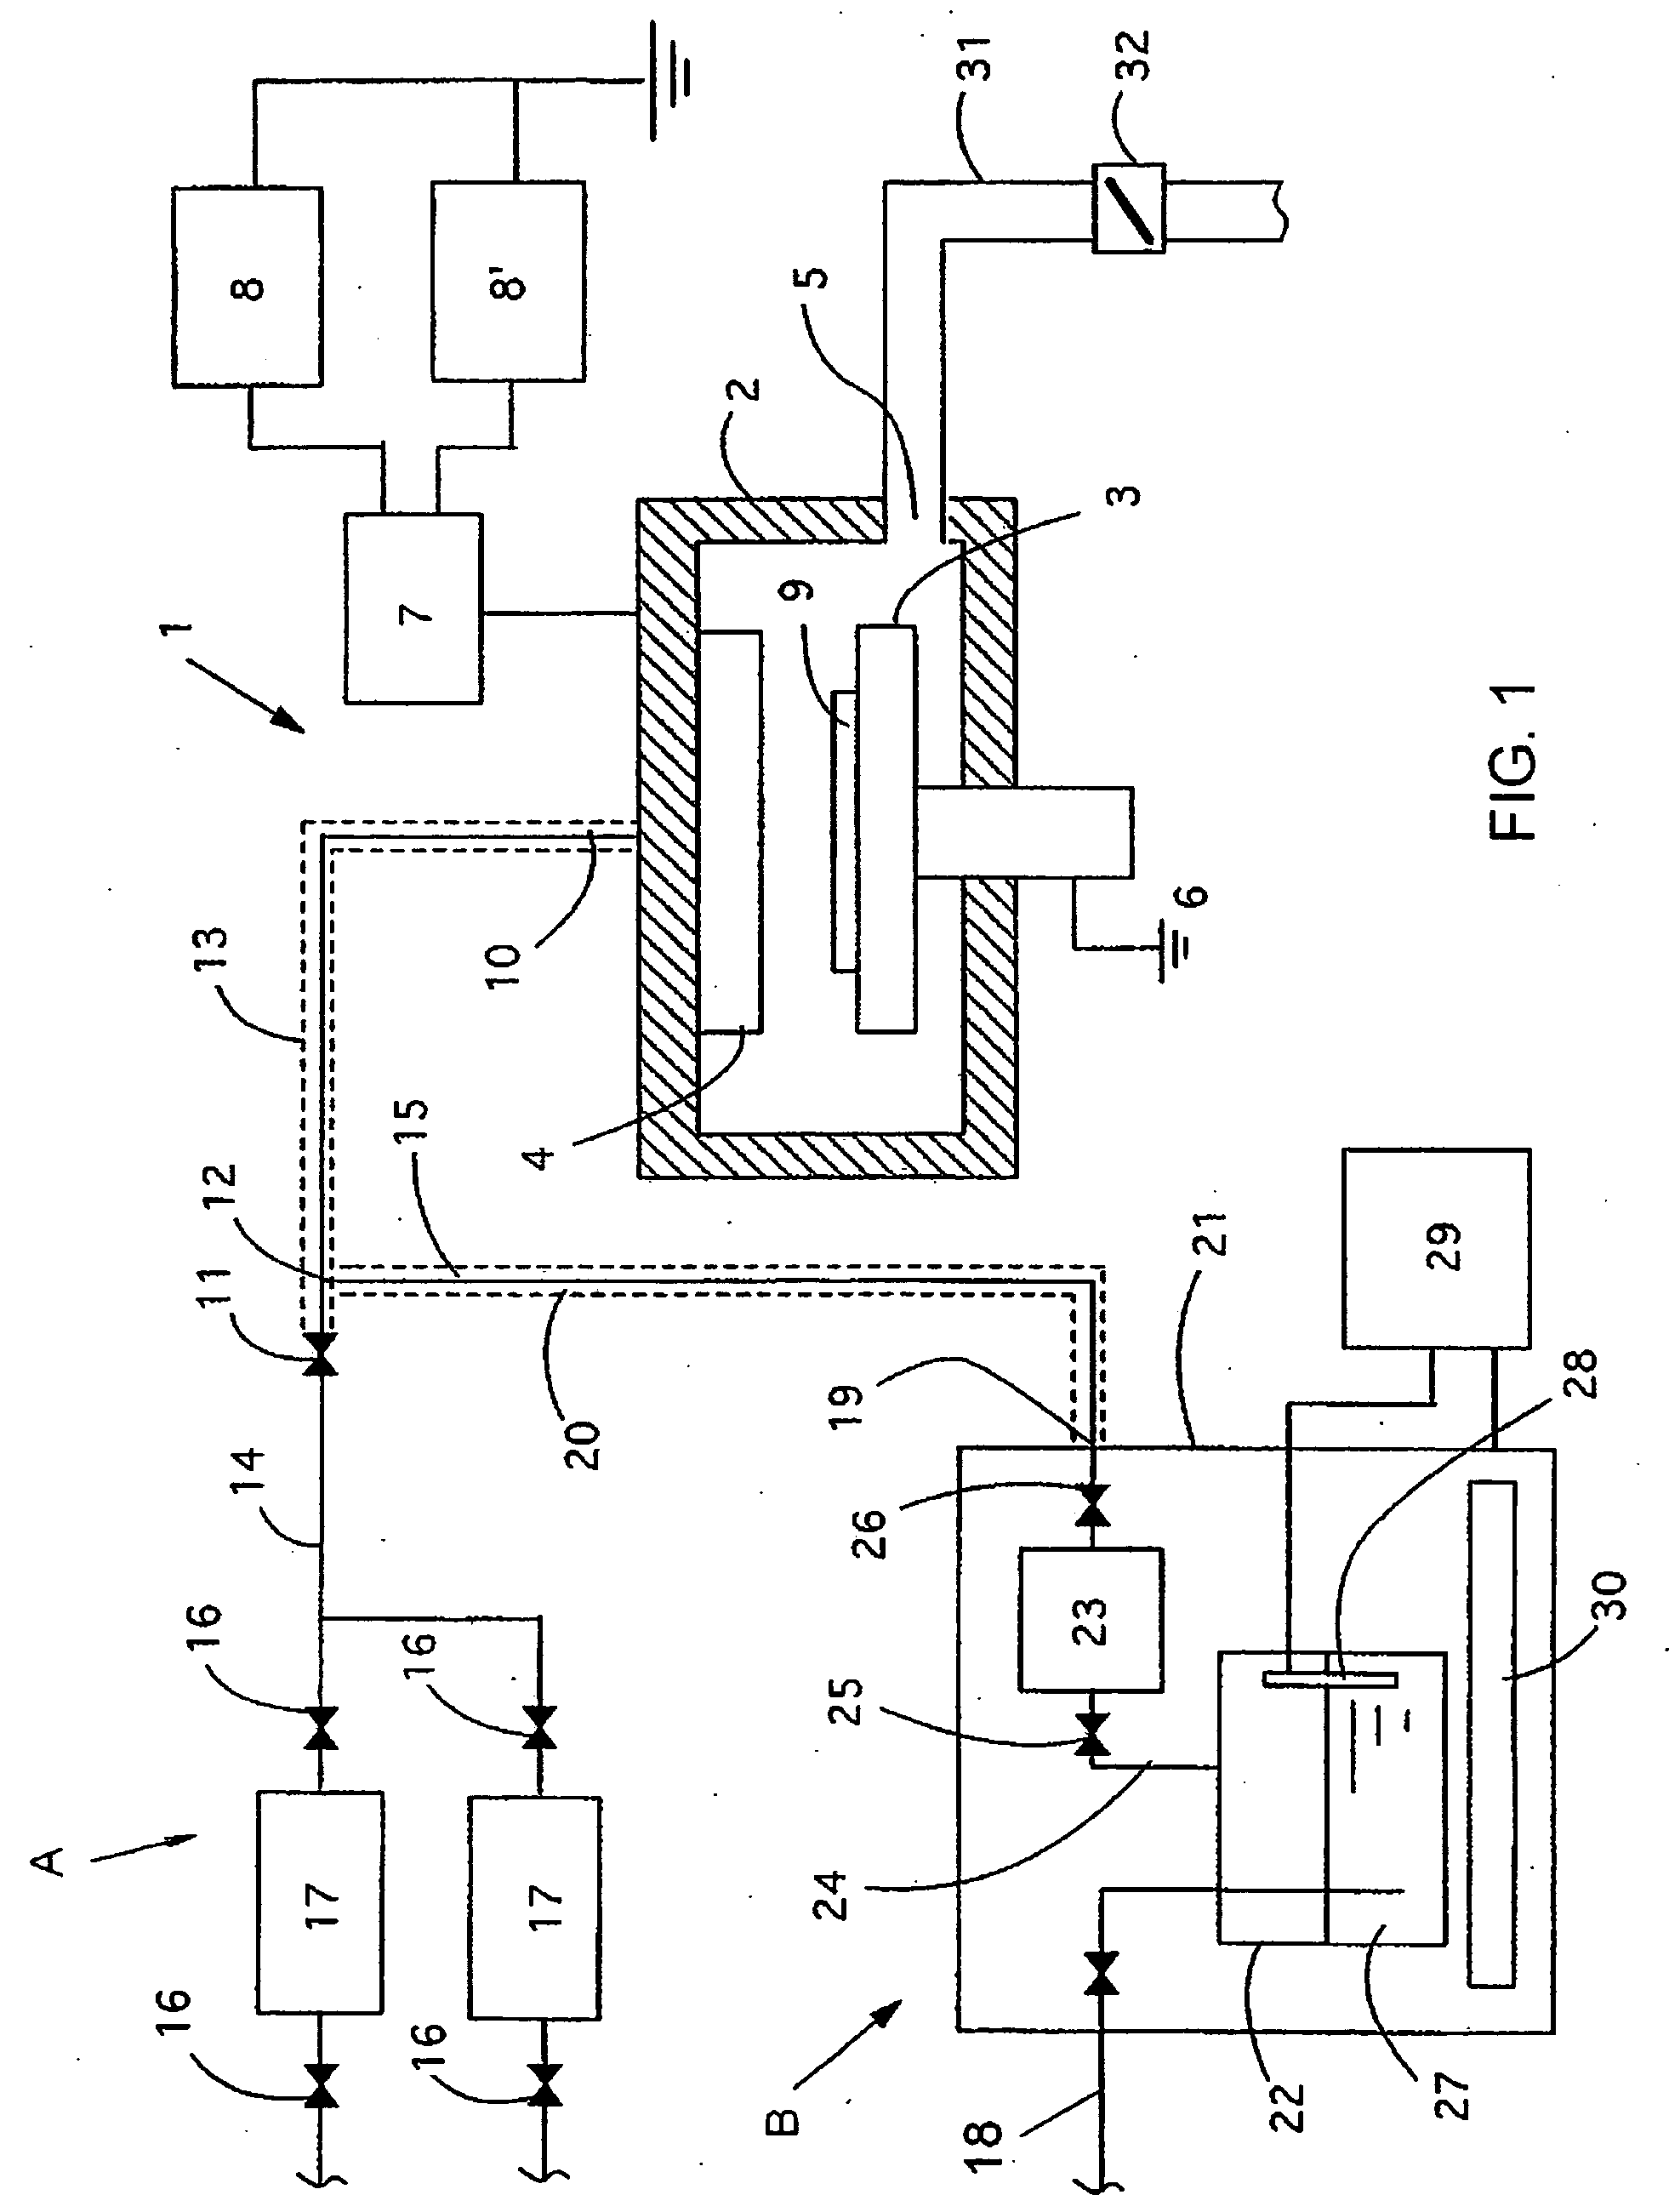 Source gas flow control and CVD using same